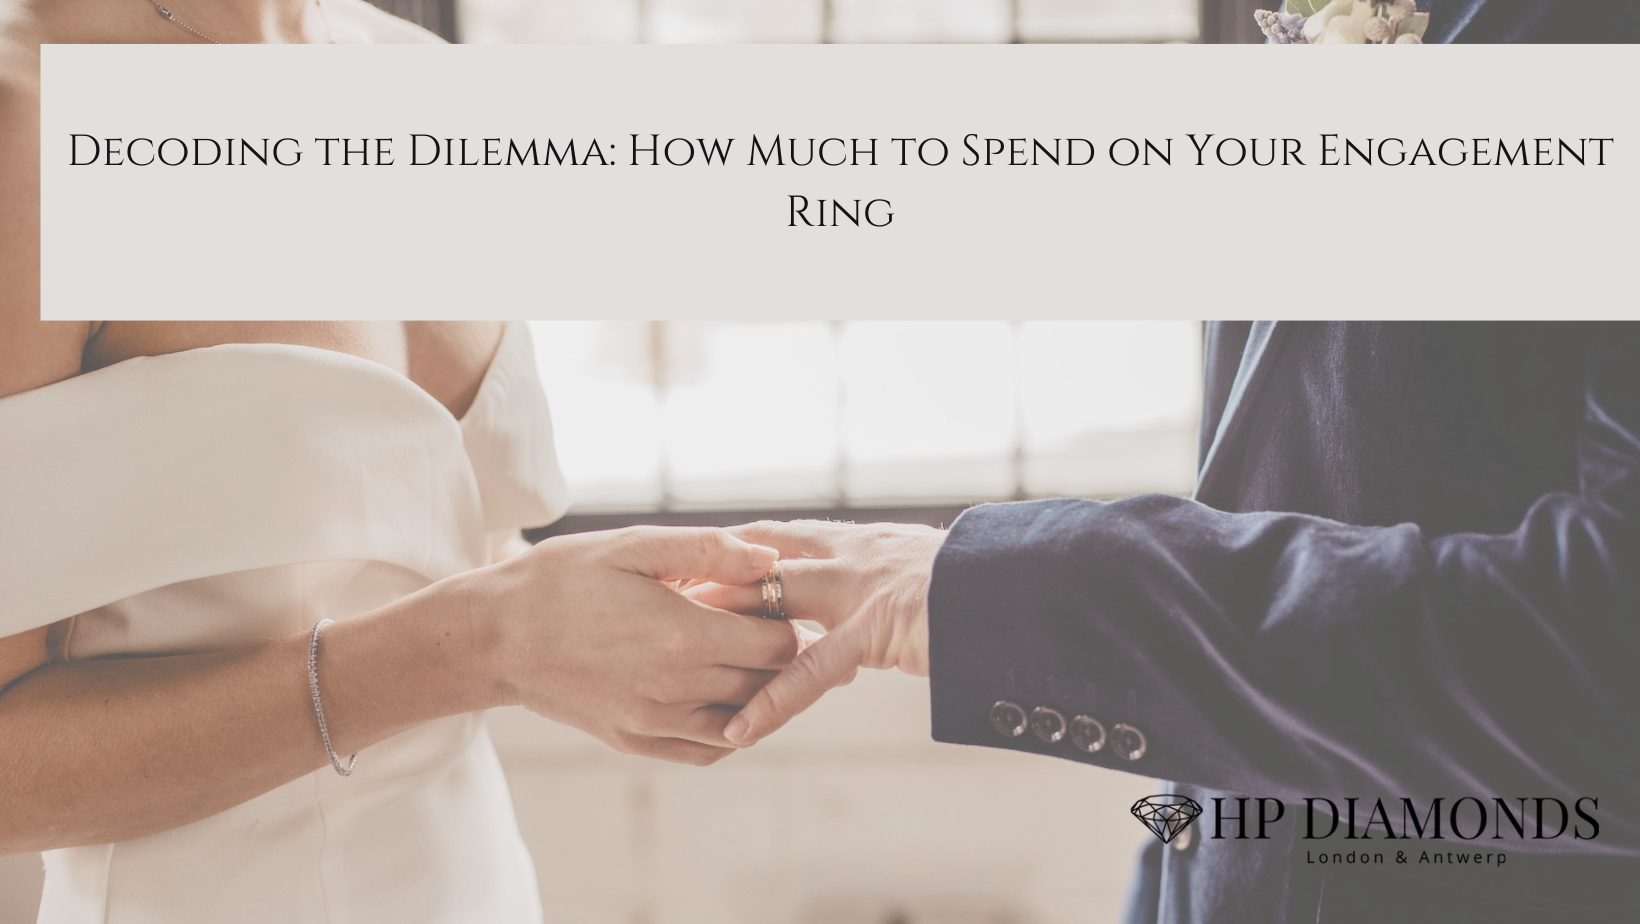 Decoding the Dilemma: How Much to Spend on Your Engagement Ring.